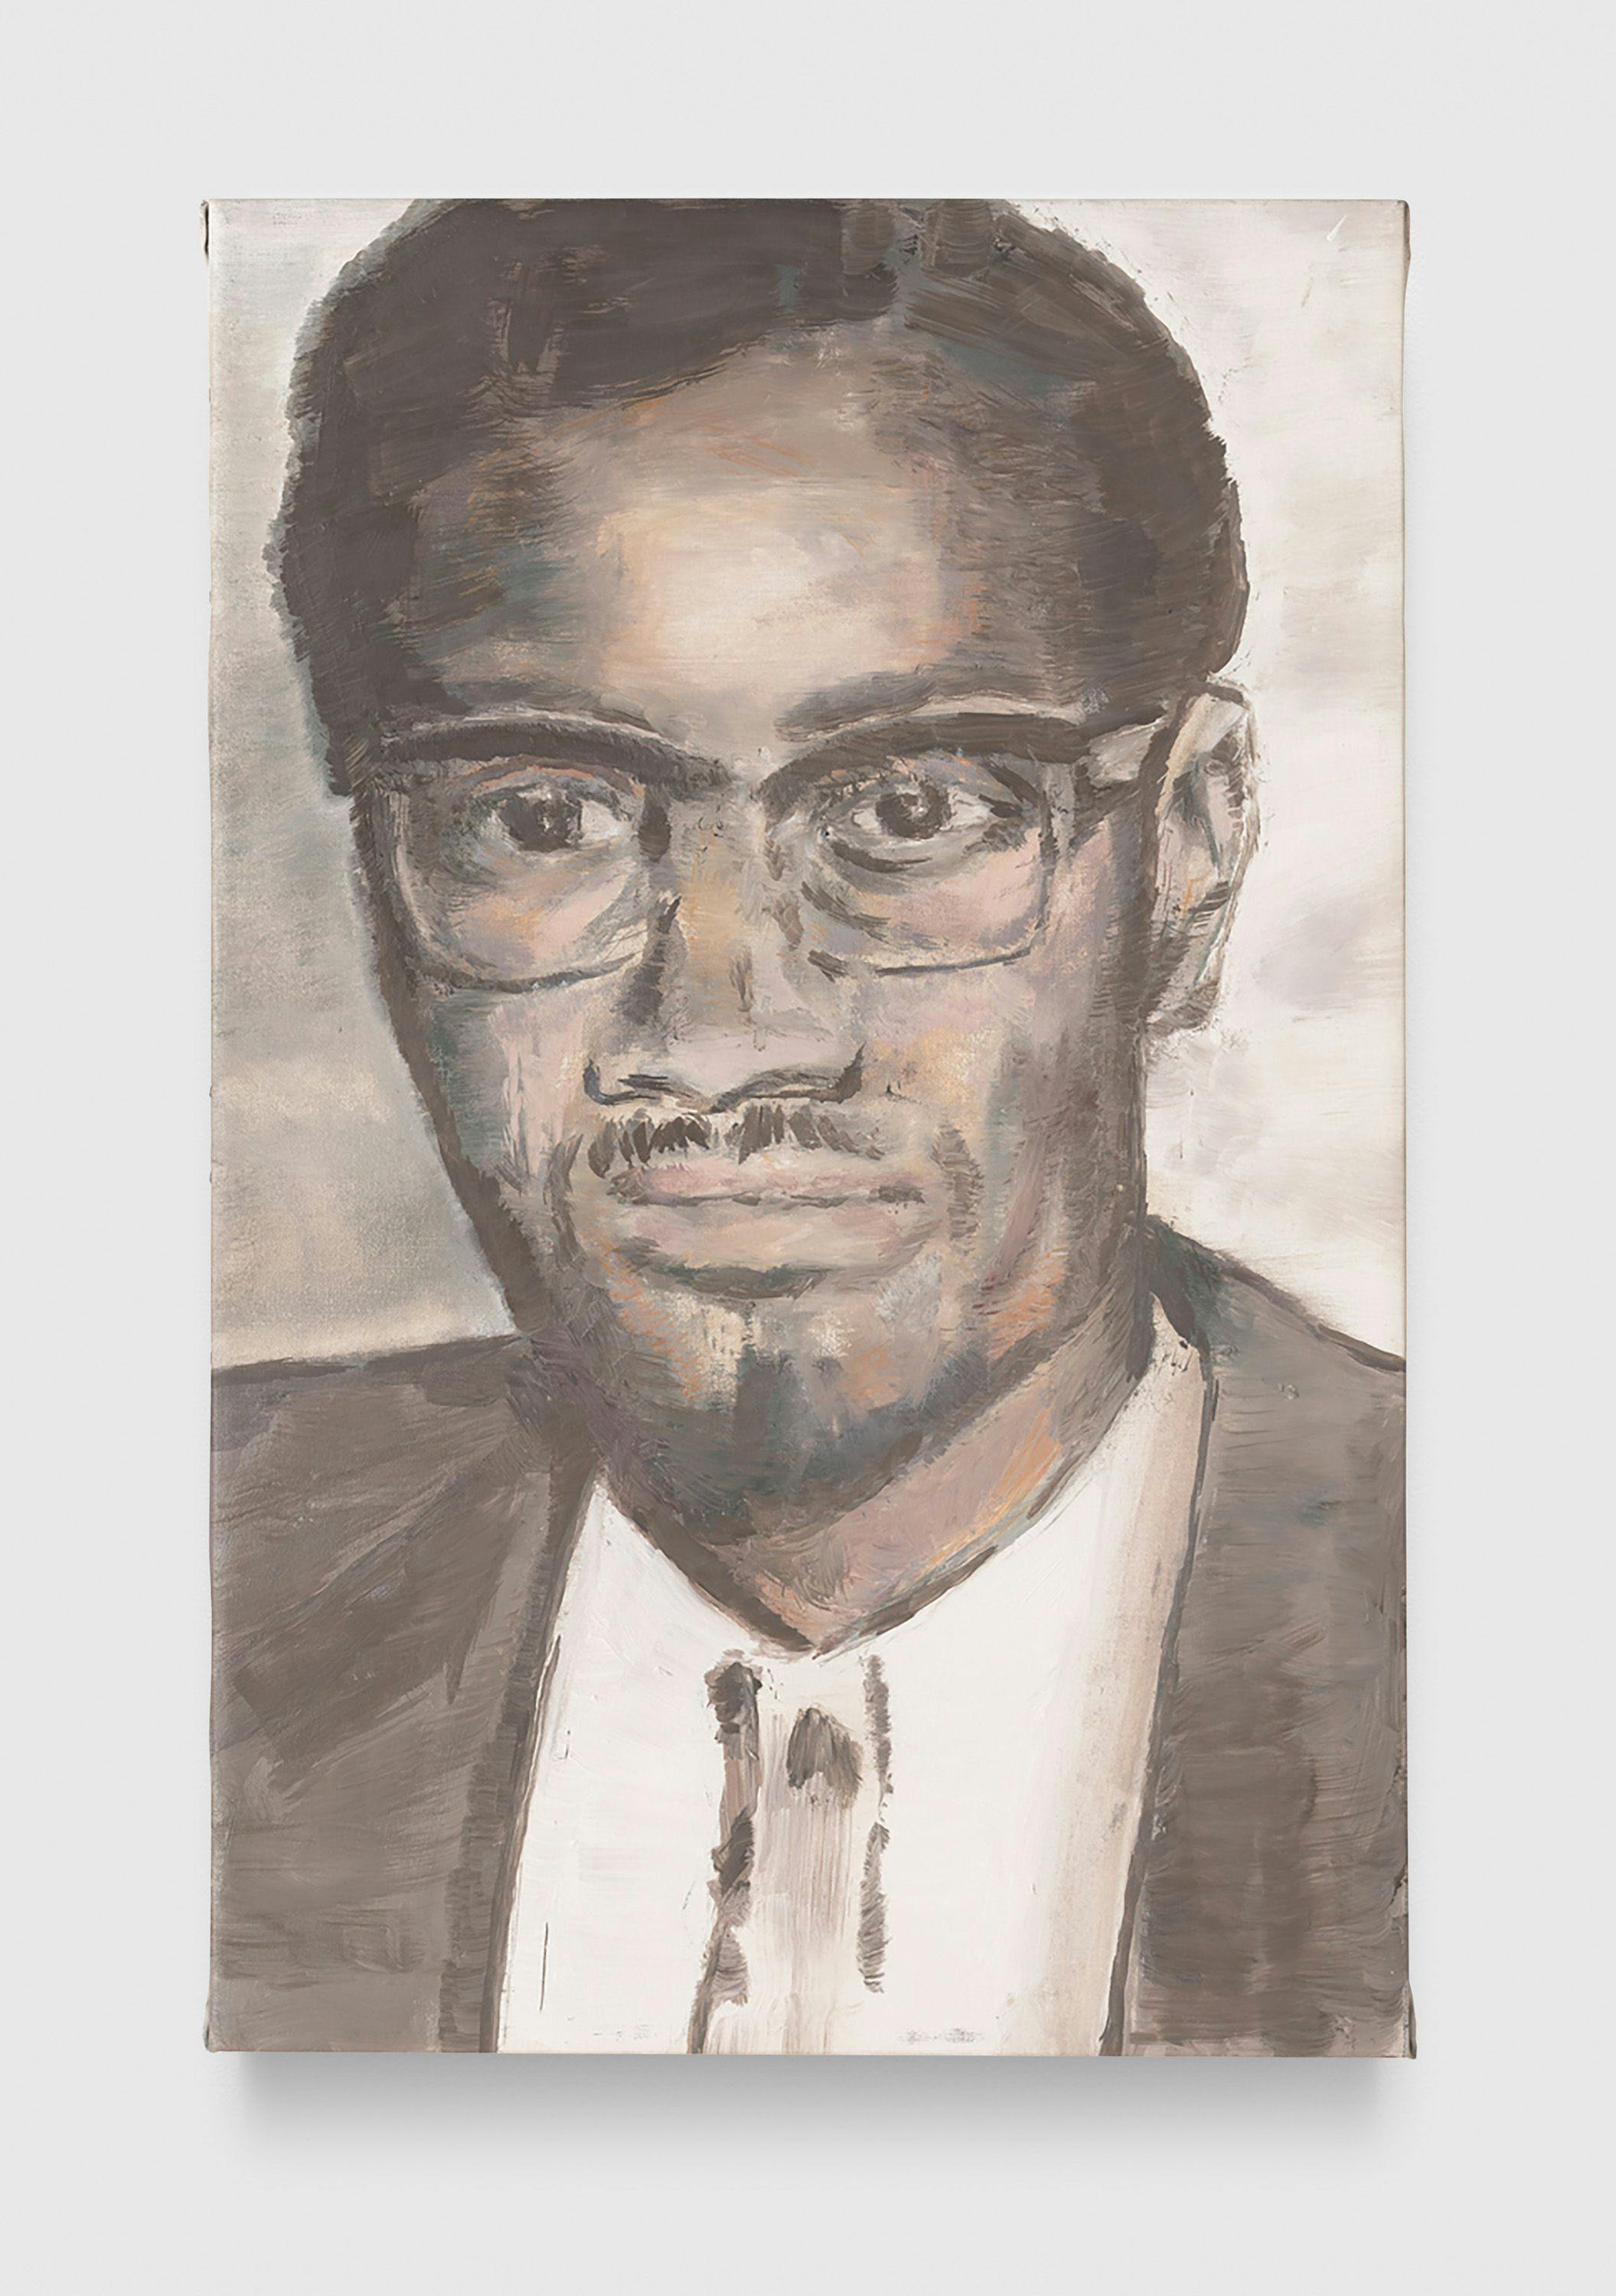 A painting by Luc Tuymans, titled Lumumba, dated 2000.